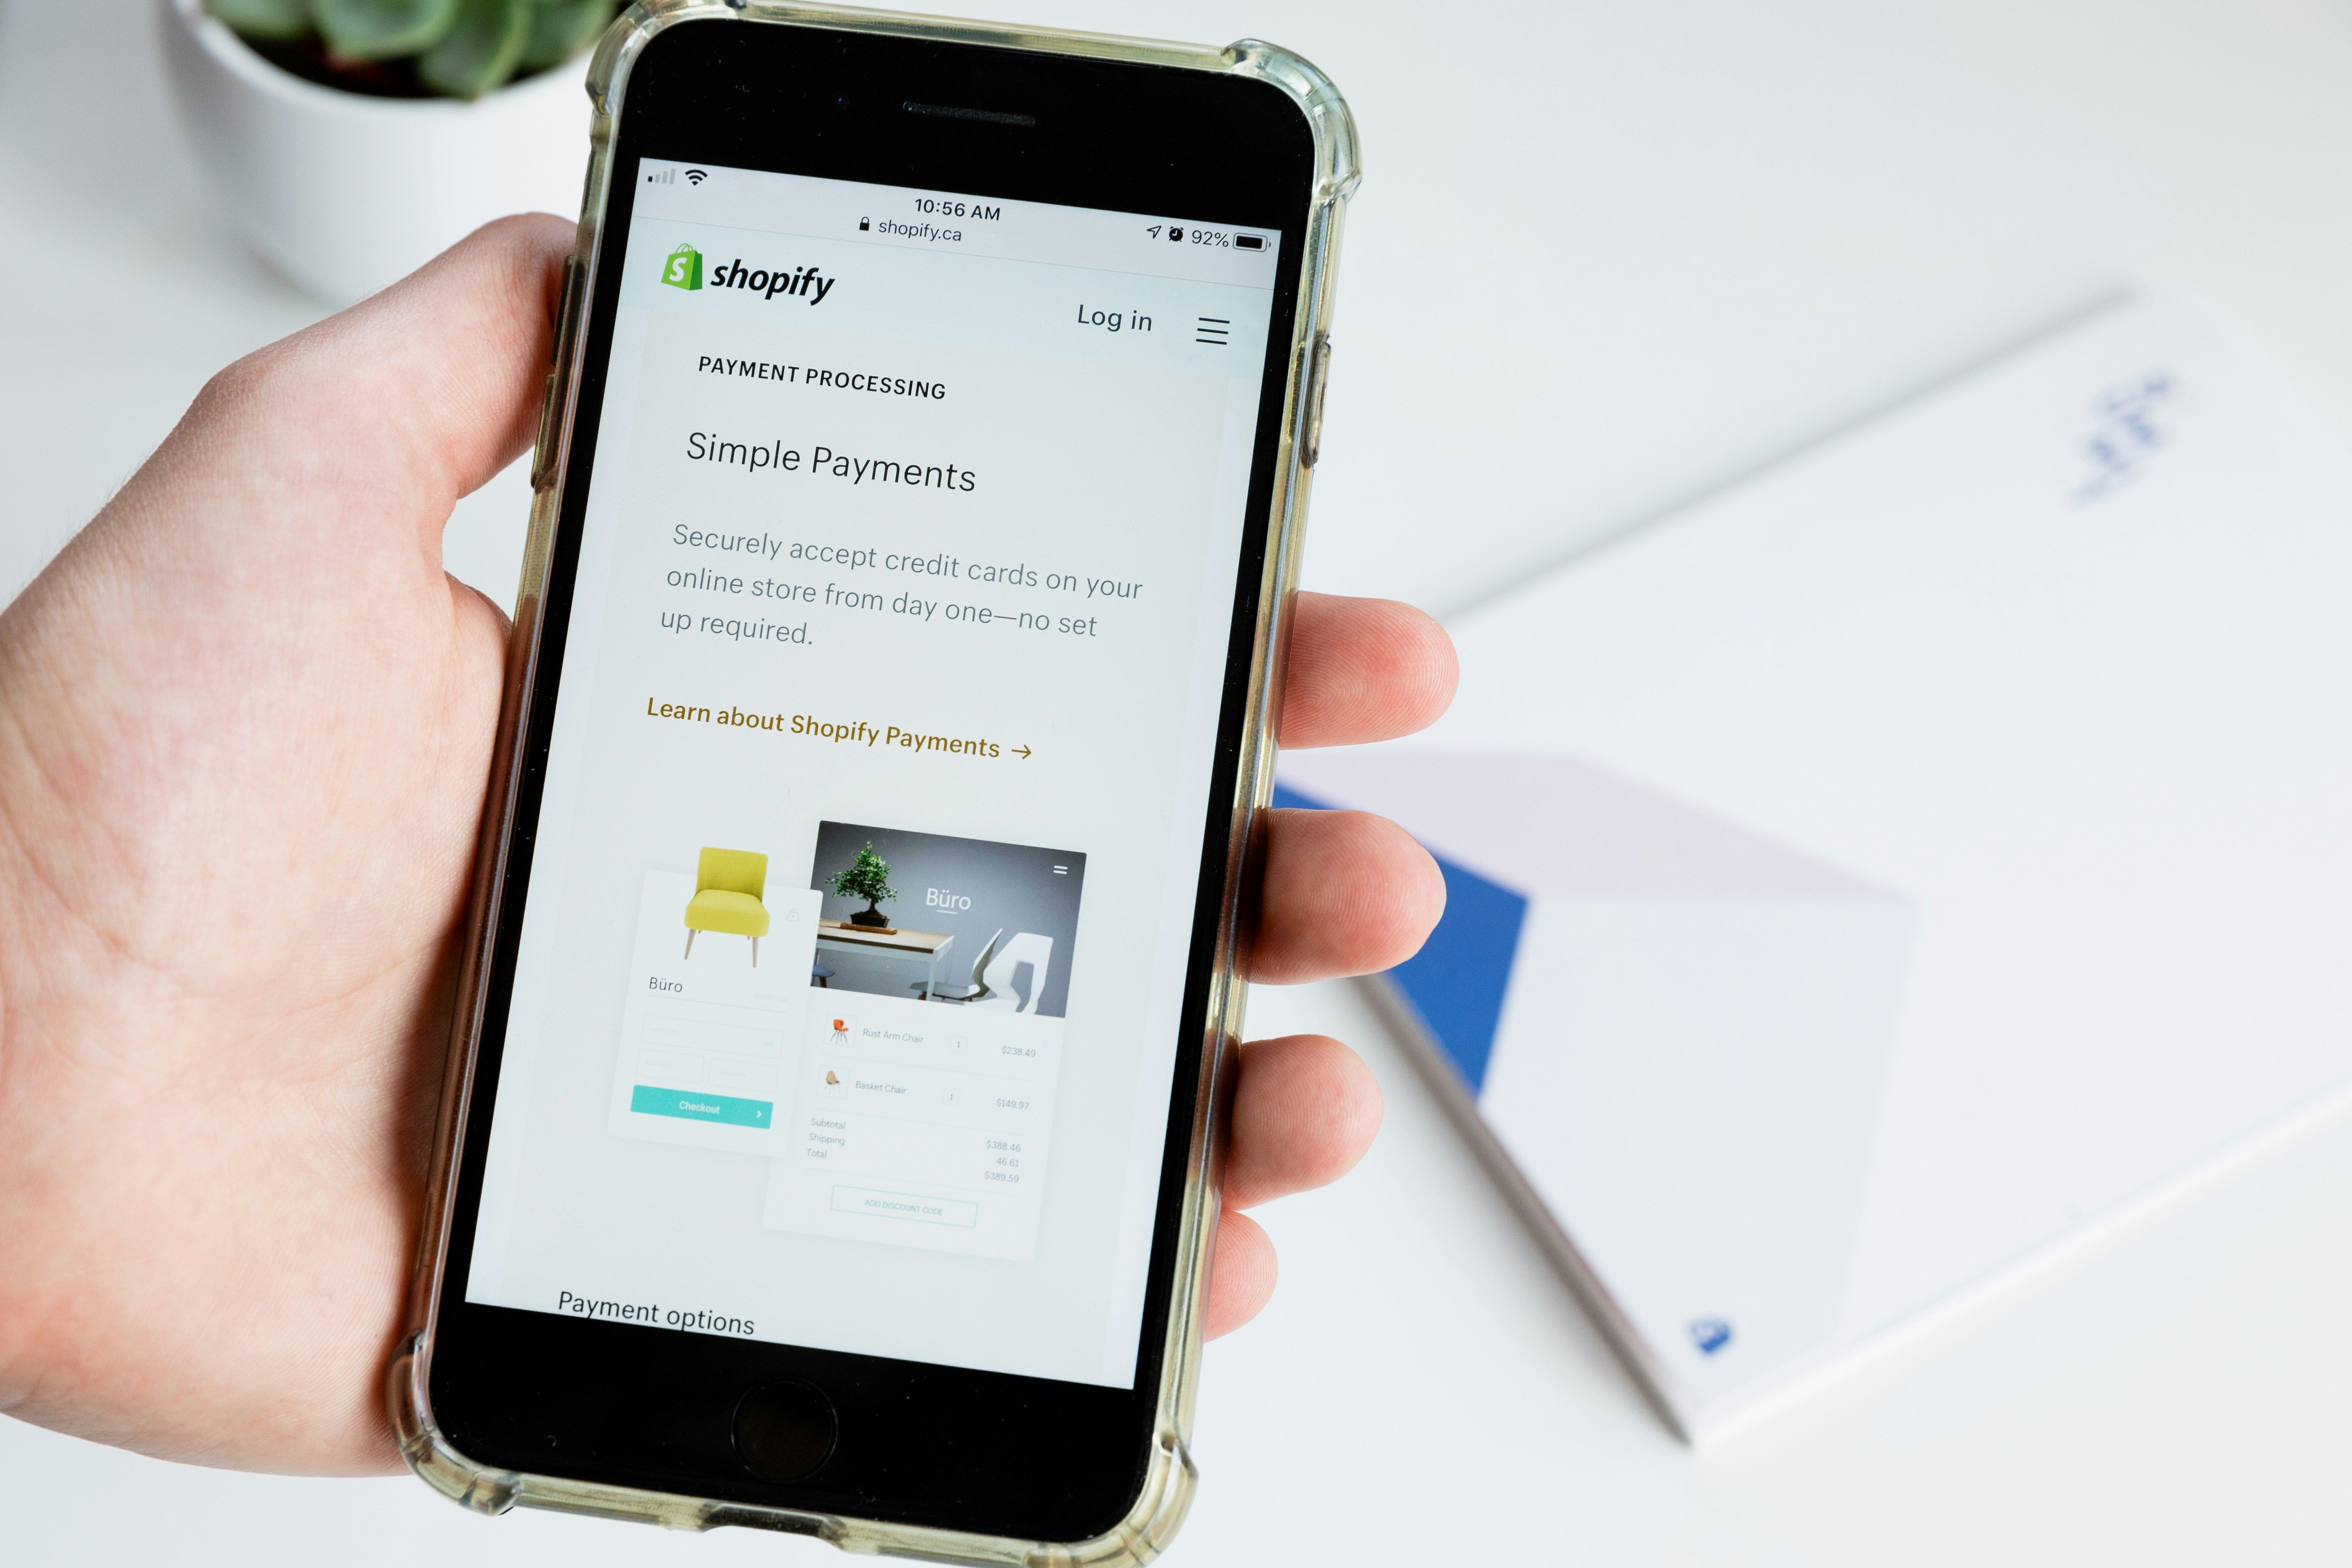 A Shopify web design agency’s essential features to consider when building a Shopify website